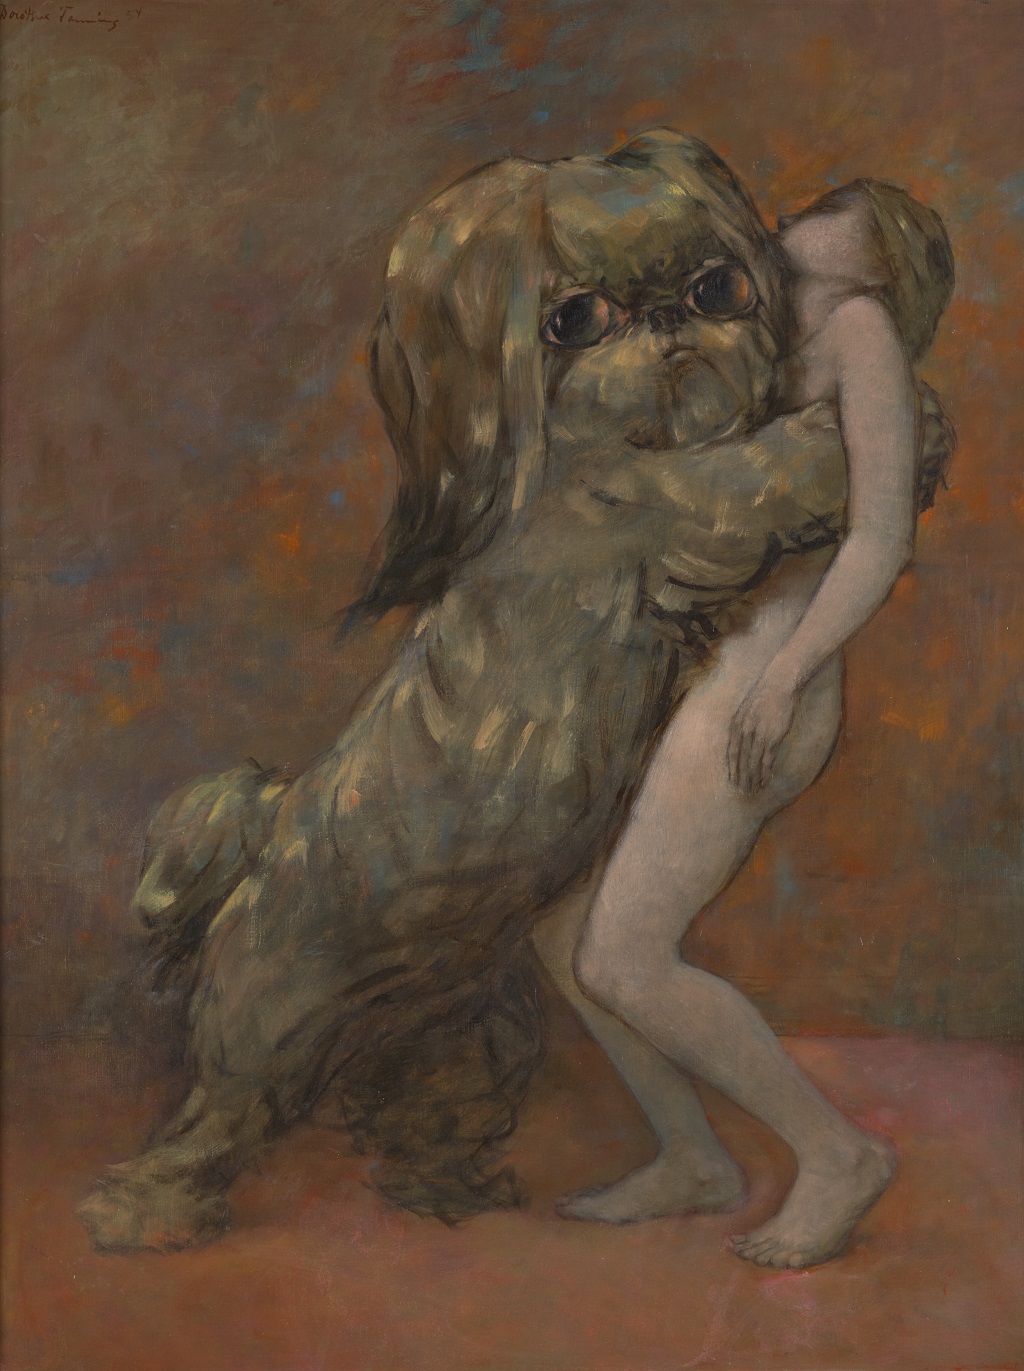 Tableau vivant (Living Picture) 1954 by Dorothea Tanning